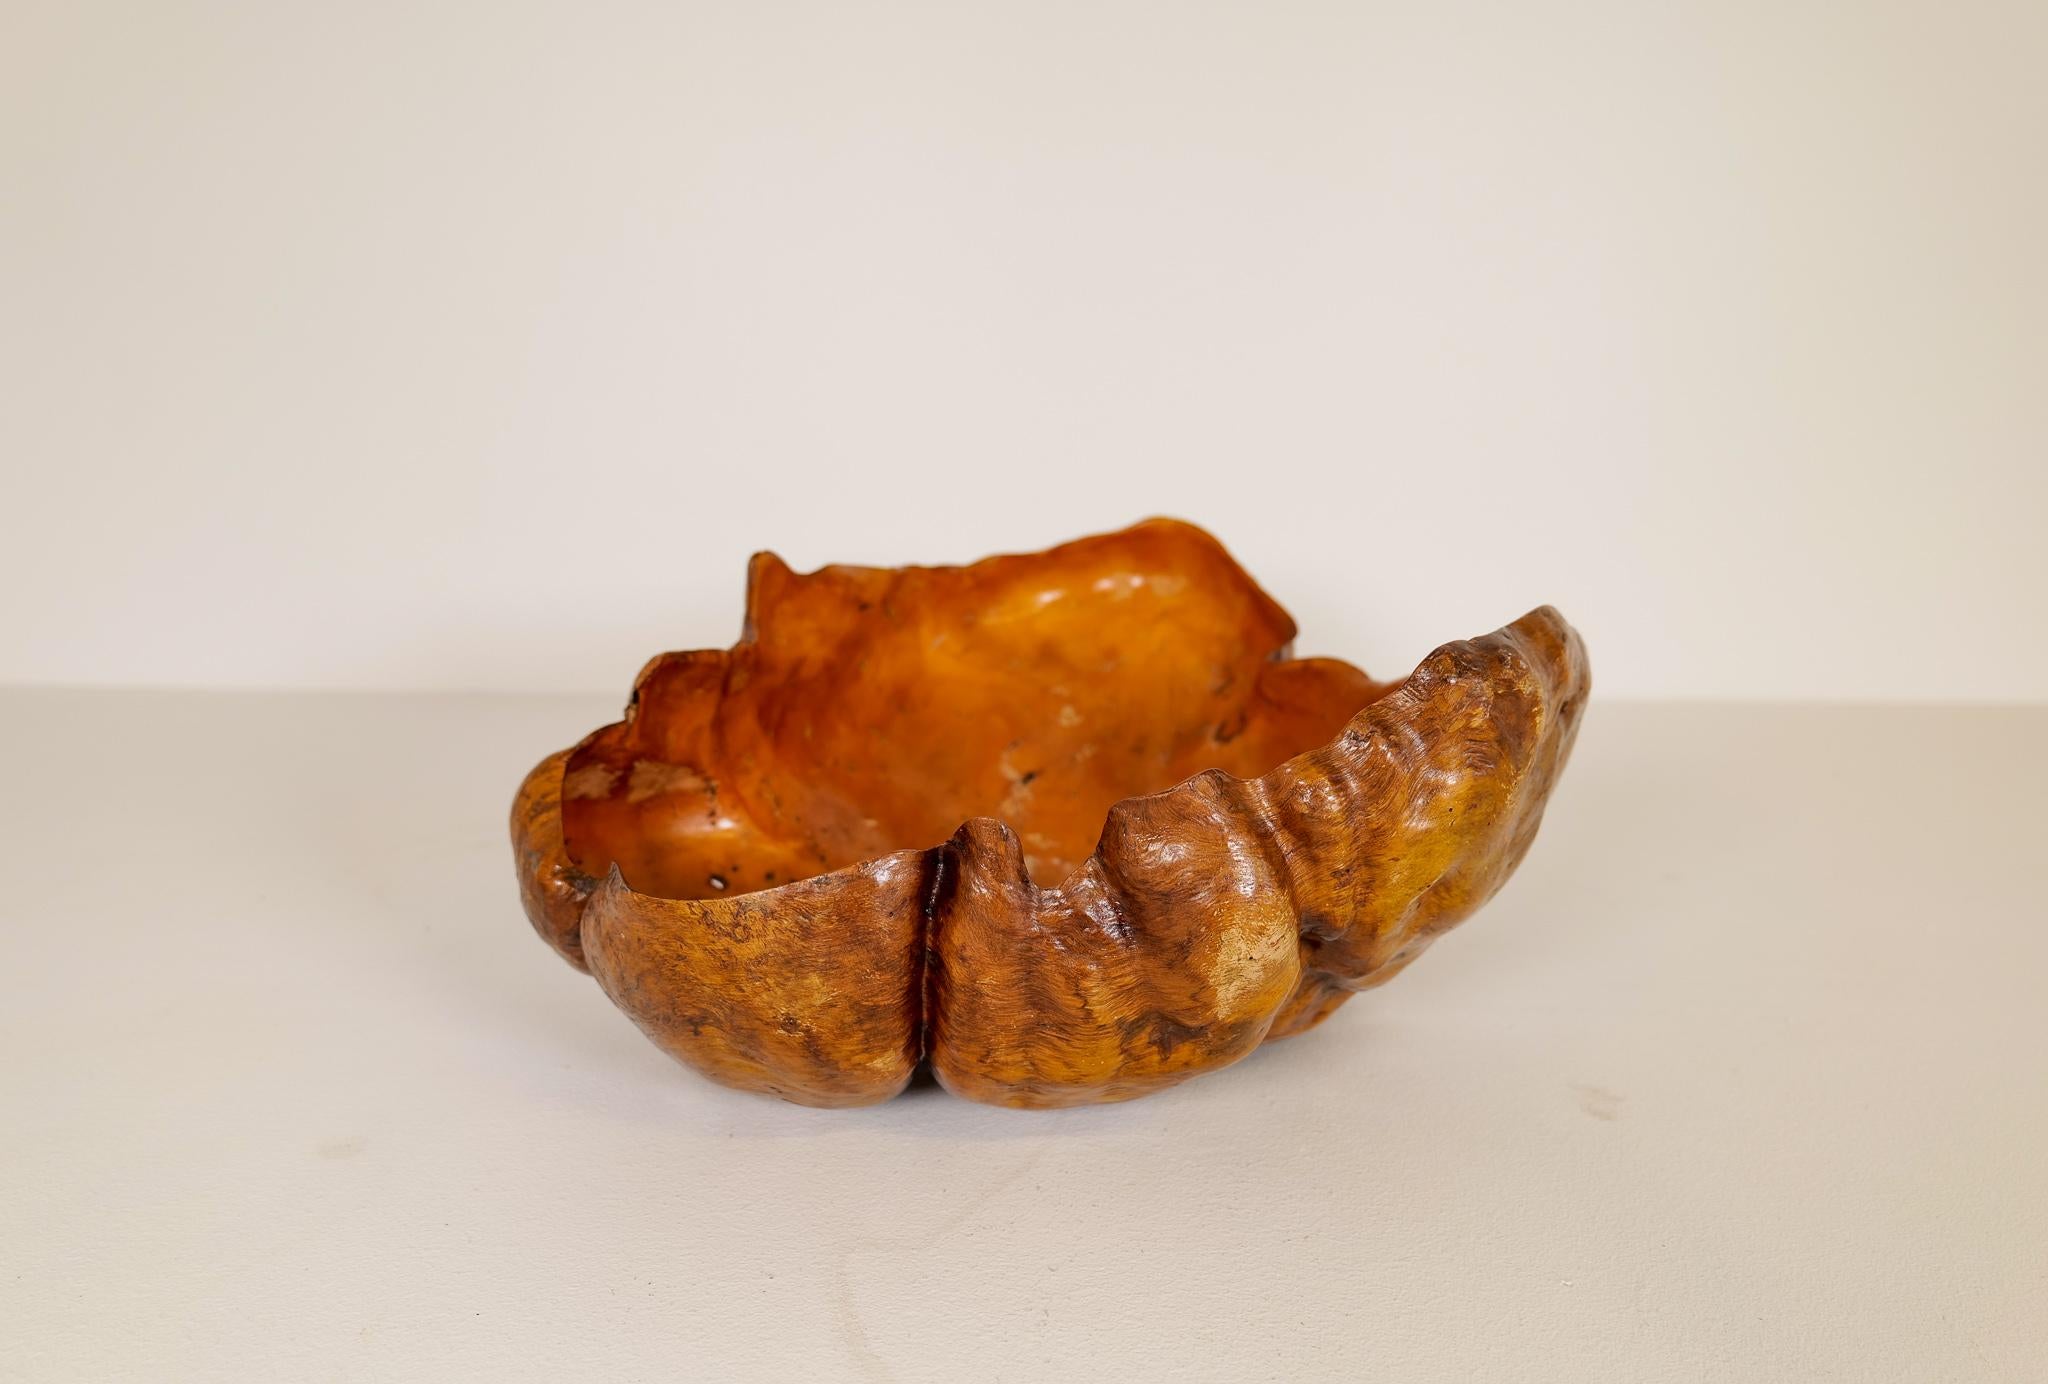 This burl made in Sweden 1960s with precision handcraft gives a nice edition to any living room with intention to give an organic simple, but jet complex look. The signs of the wood structure and life are clearly visible. The burl is made from the